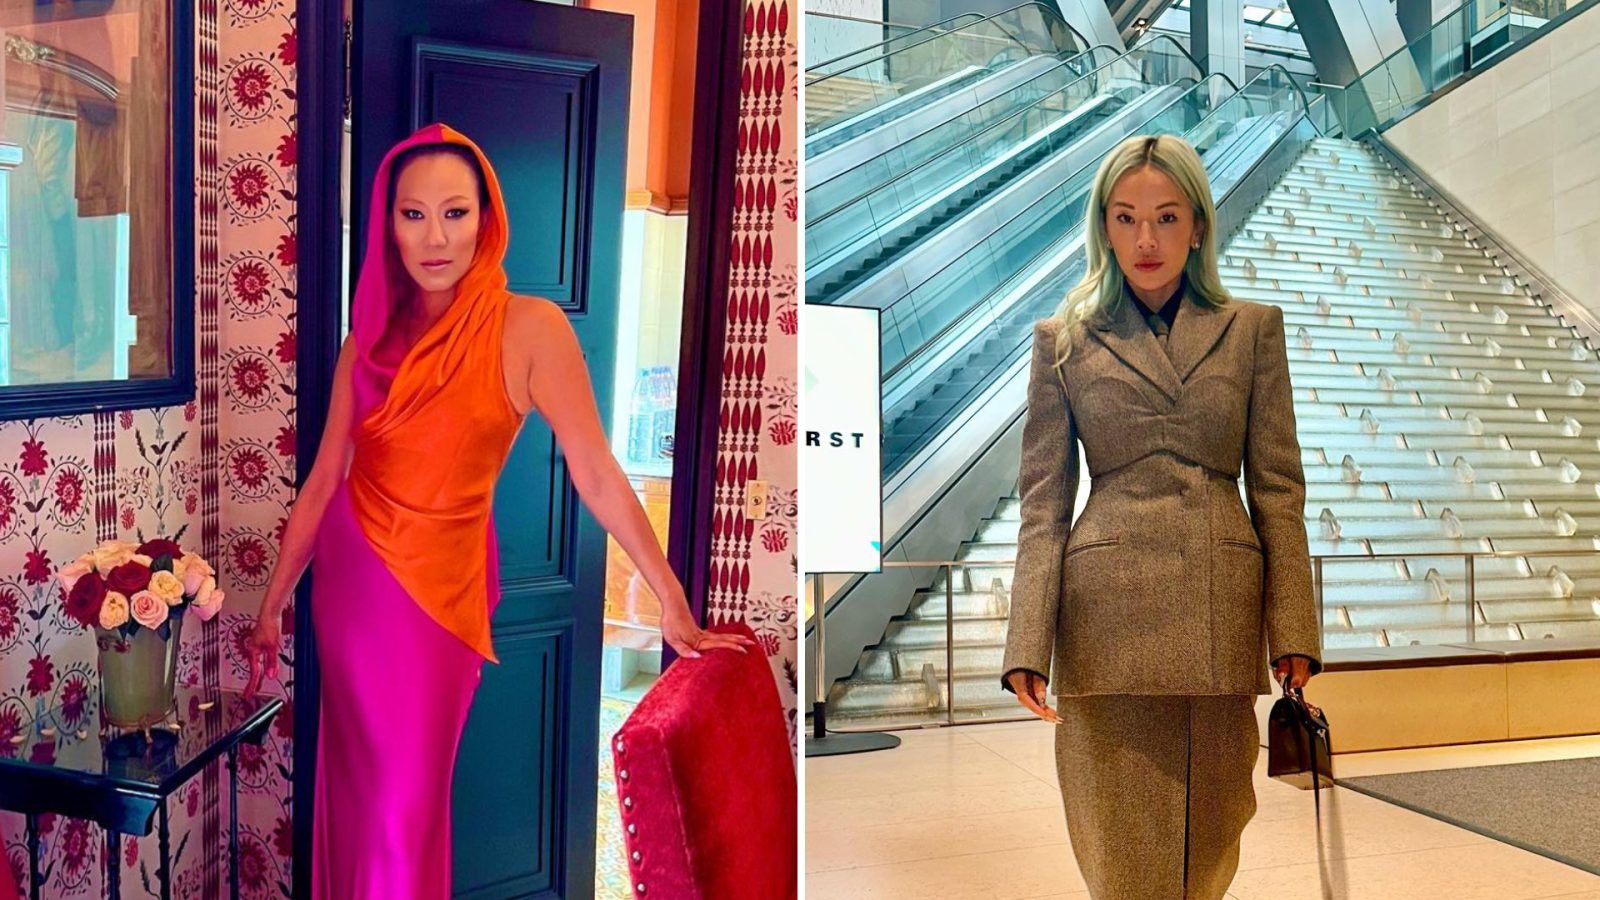 15 of the best style moments from the cast of 'Bling Empire